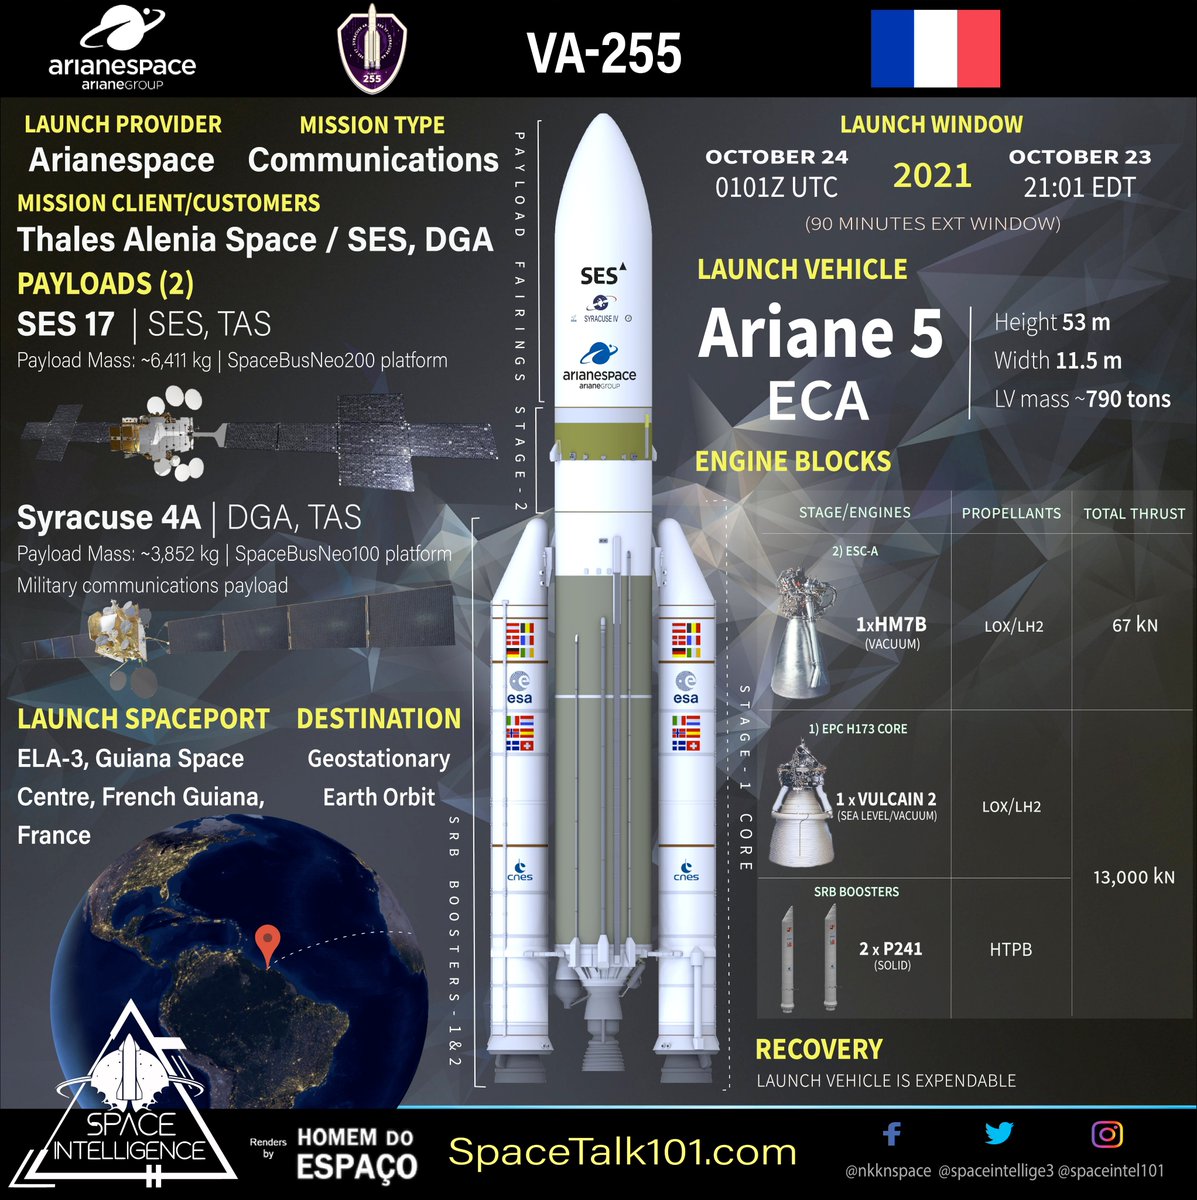 Orbital Launch no.103 of 2021 🇫🇷🚀🇫🇷🛰️🛰️

VA255 | Arianespace | Oct 23 | 2101 ET

@Arianespace's #Ariane5 Rocket launched the heaviest payload (10,263 kg) to GTO ever: #SES17 🛰️ from SES and #Syracuse4A 🛰️ from DGA, both built by @Thales_Alenia_S.